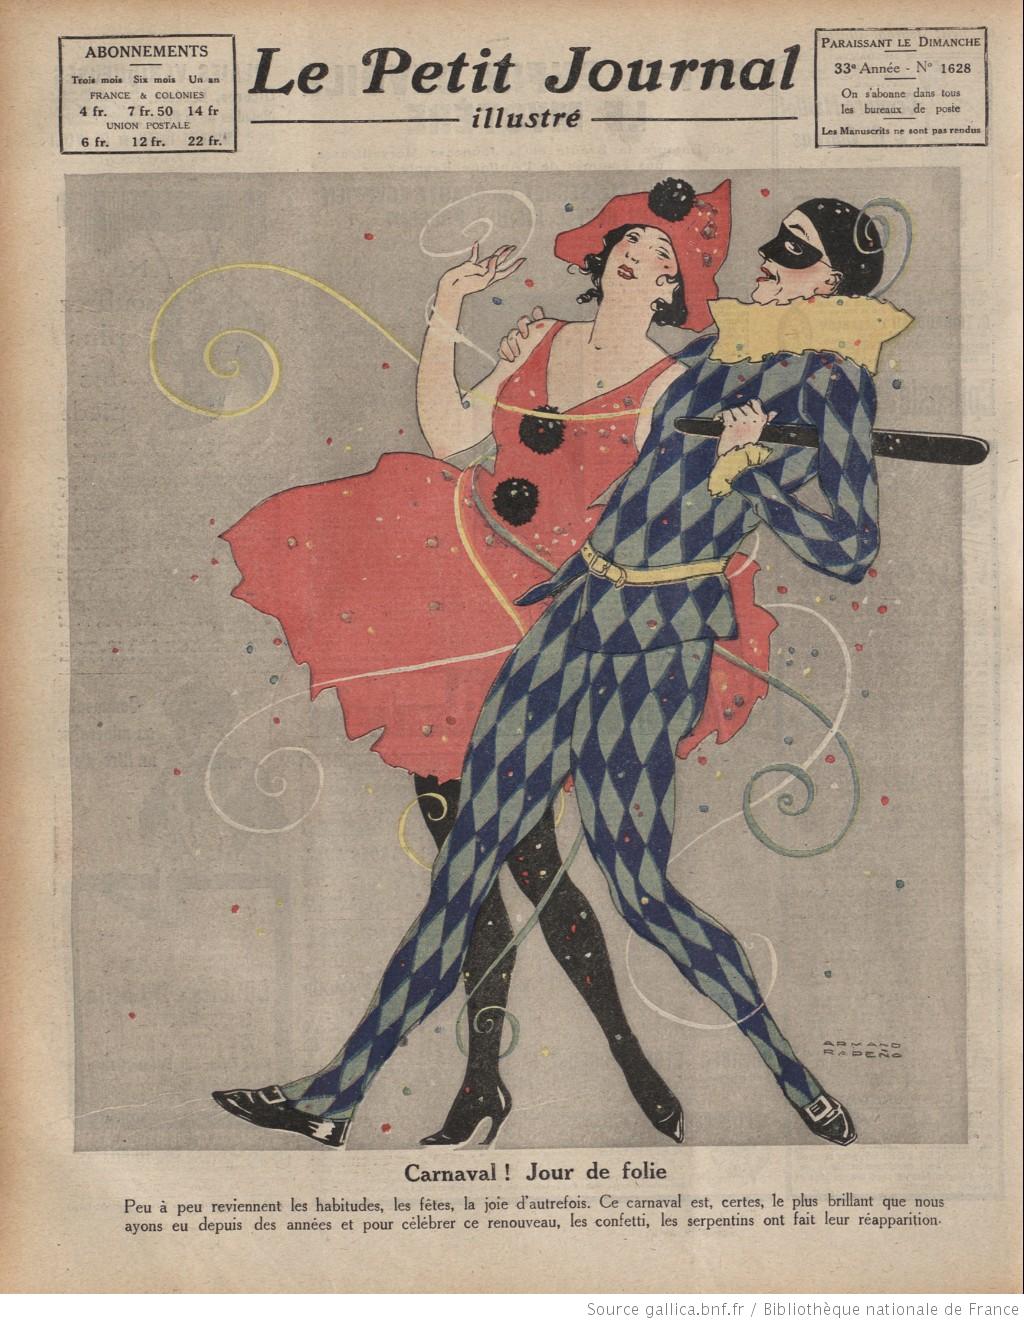 The 1920 edition of the Carnival featured on the Petit Journal illustré (#1628)